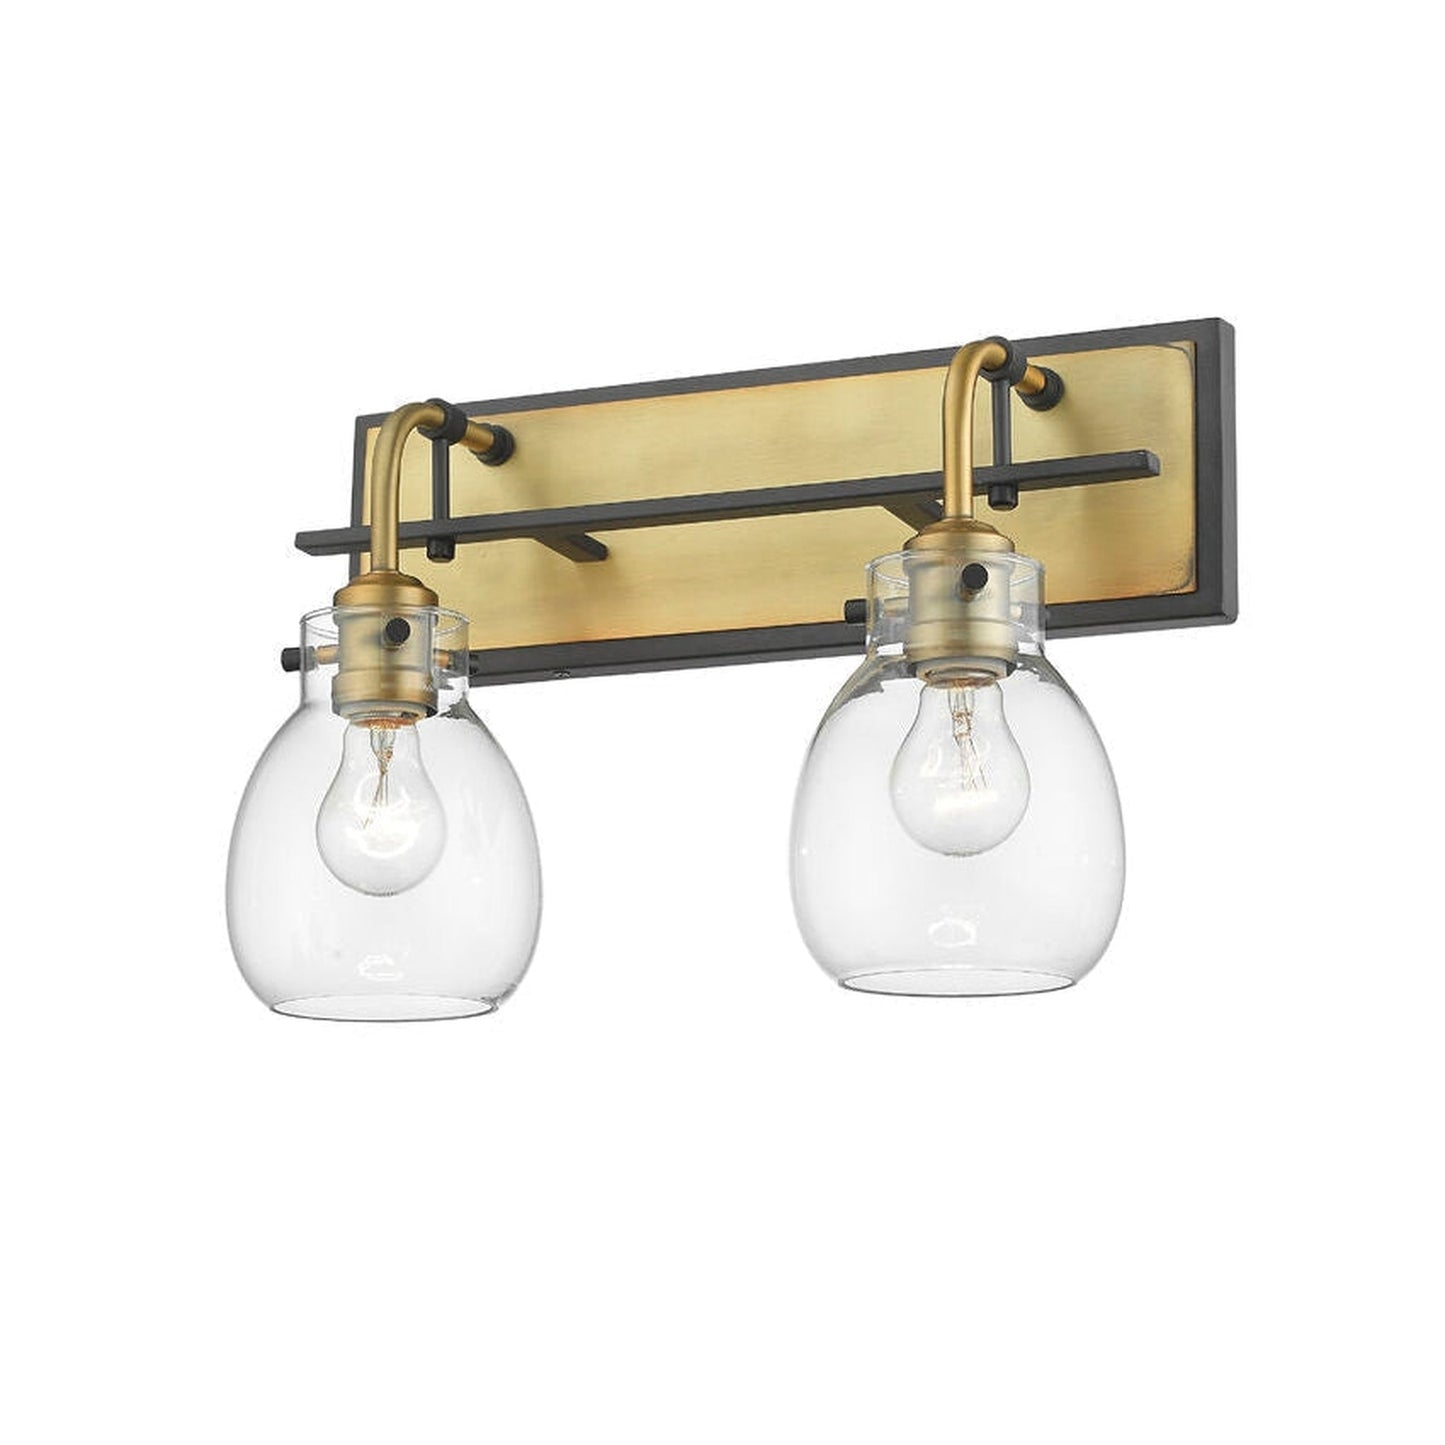 Z-Lite Kraken 16" 2-Light Matte Black and Olde Brass Wall Sconce With Clear Glass Shade